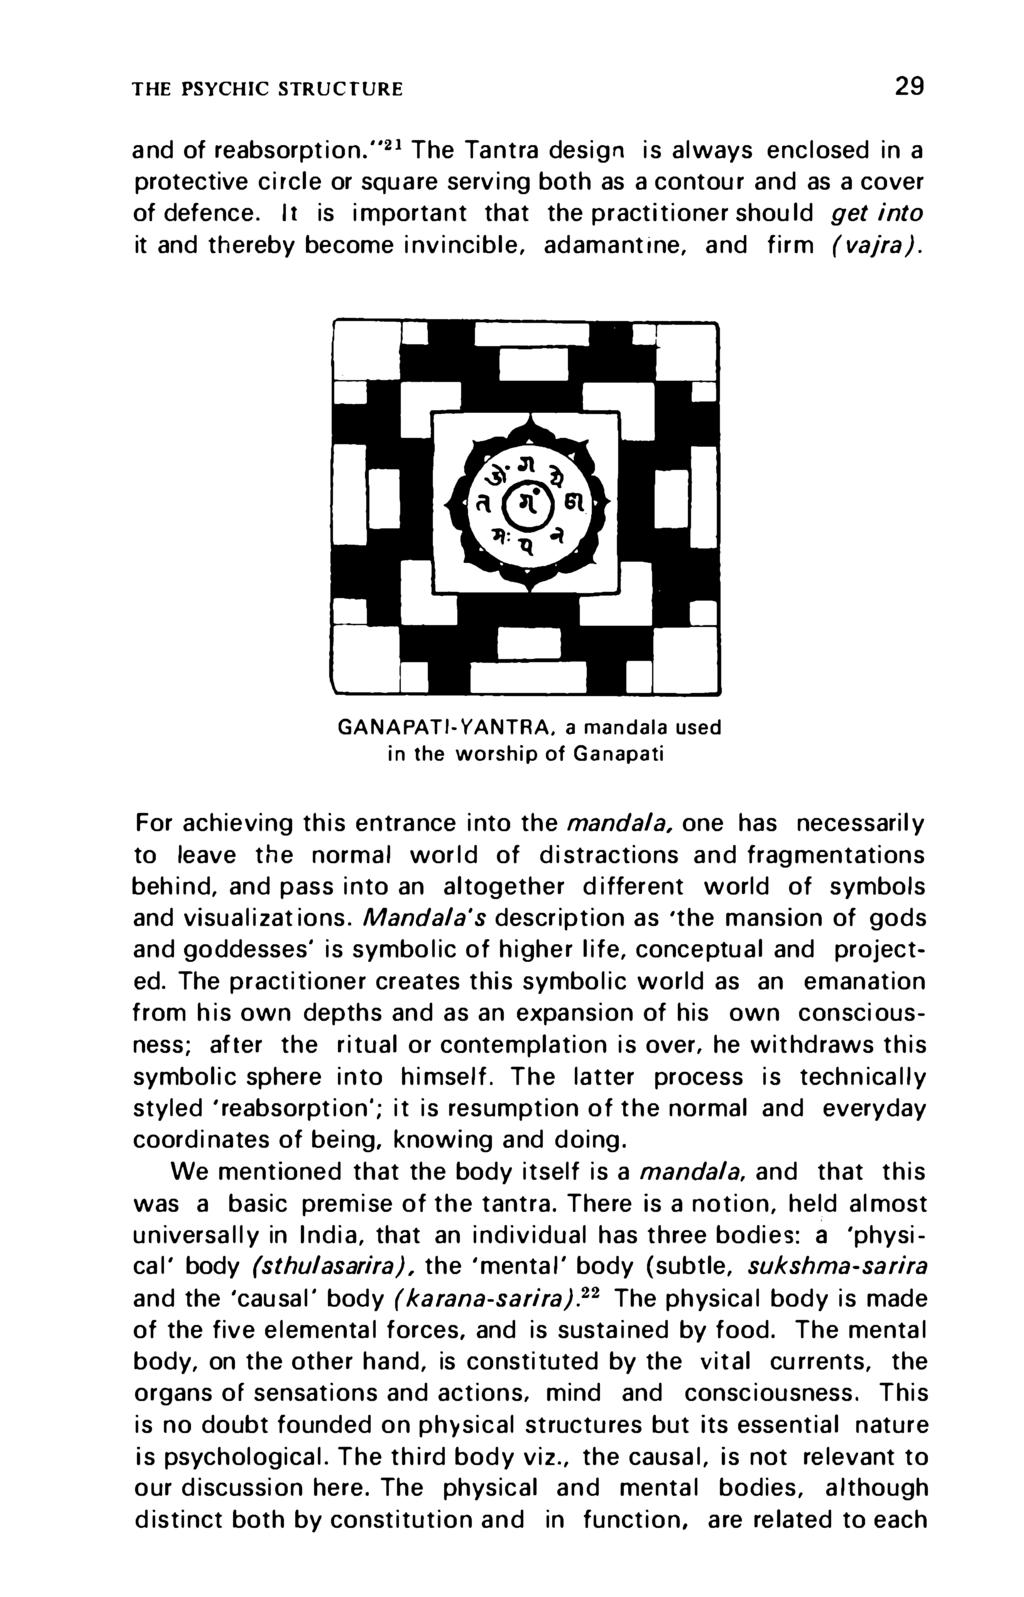 THE PSYCHIC STRUCTURE 29 and of reabsorption."21 The Tantra design is always enclosed in a protective circle or square serving both as a contour and as a cover of defence.